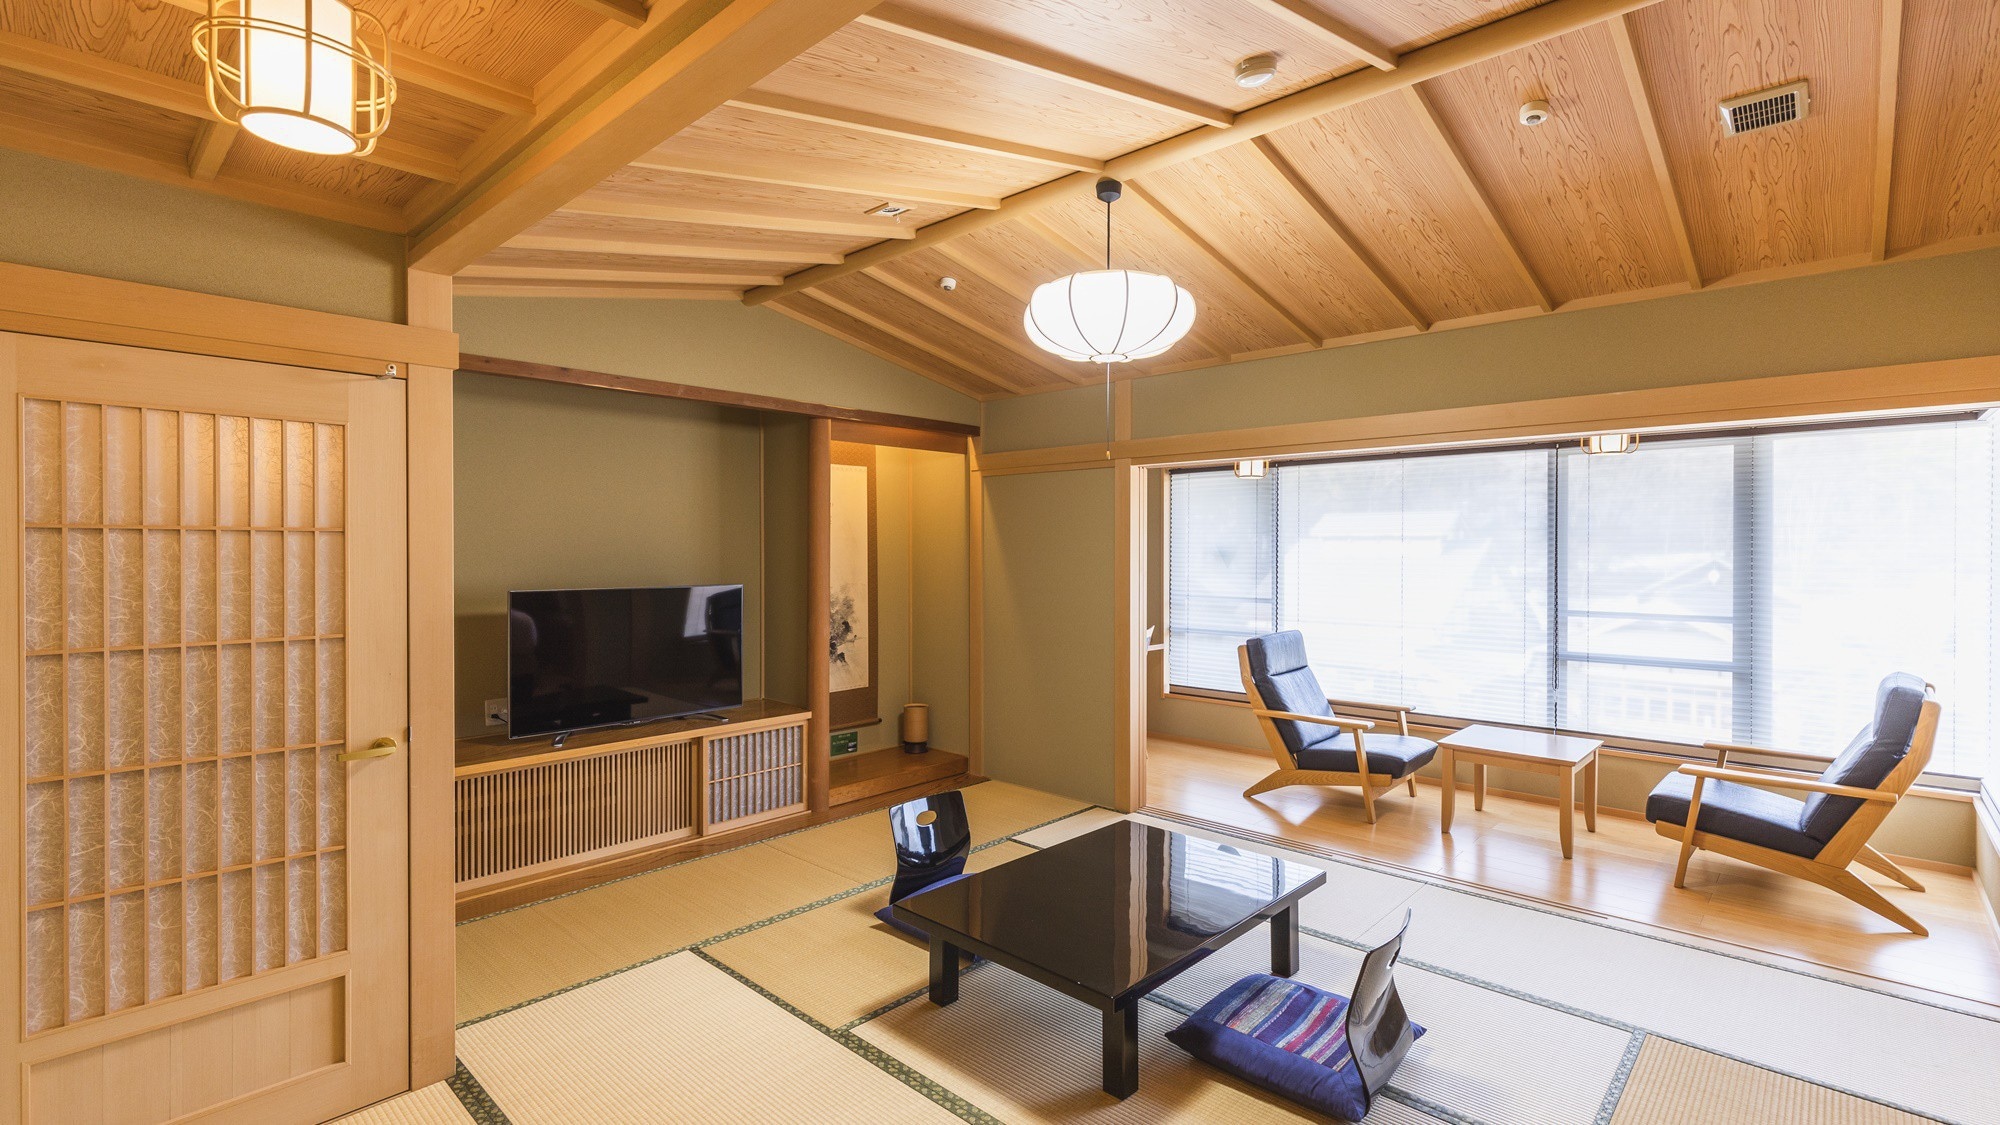 [Special room "Shakunage"] The expansive view and the simple Japanese atmosphere make the surrounding scenery stand out even more.